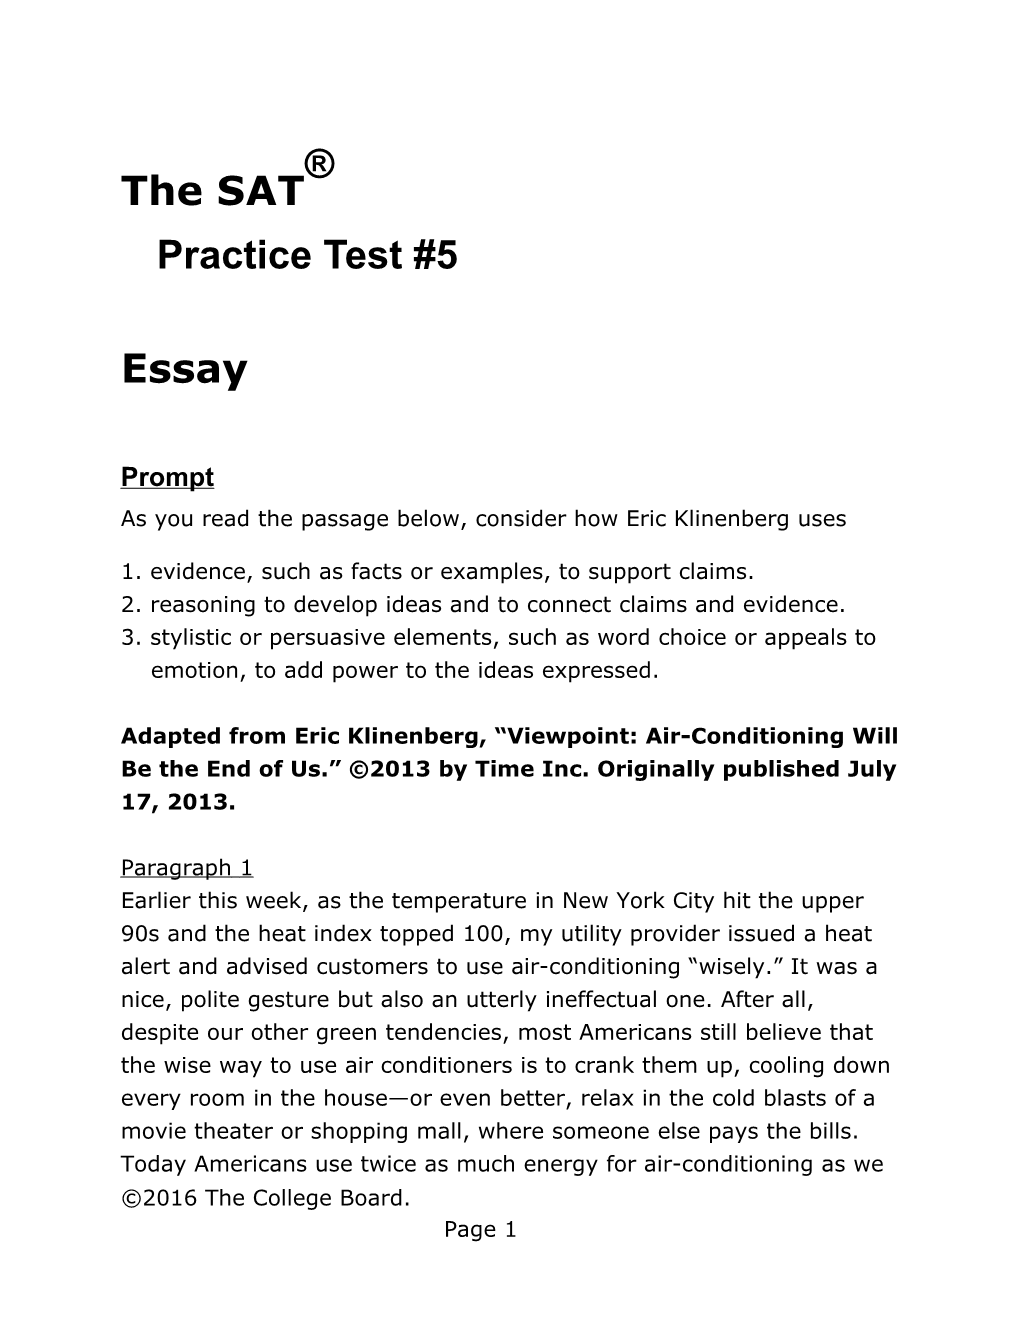 SAT Practice Test 5 Essay for Assistive Technology SAT Suite of Assessments the College Board